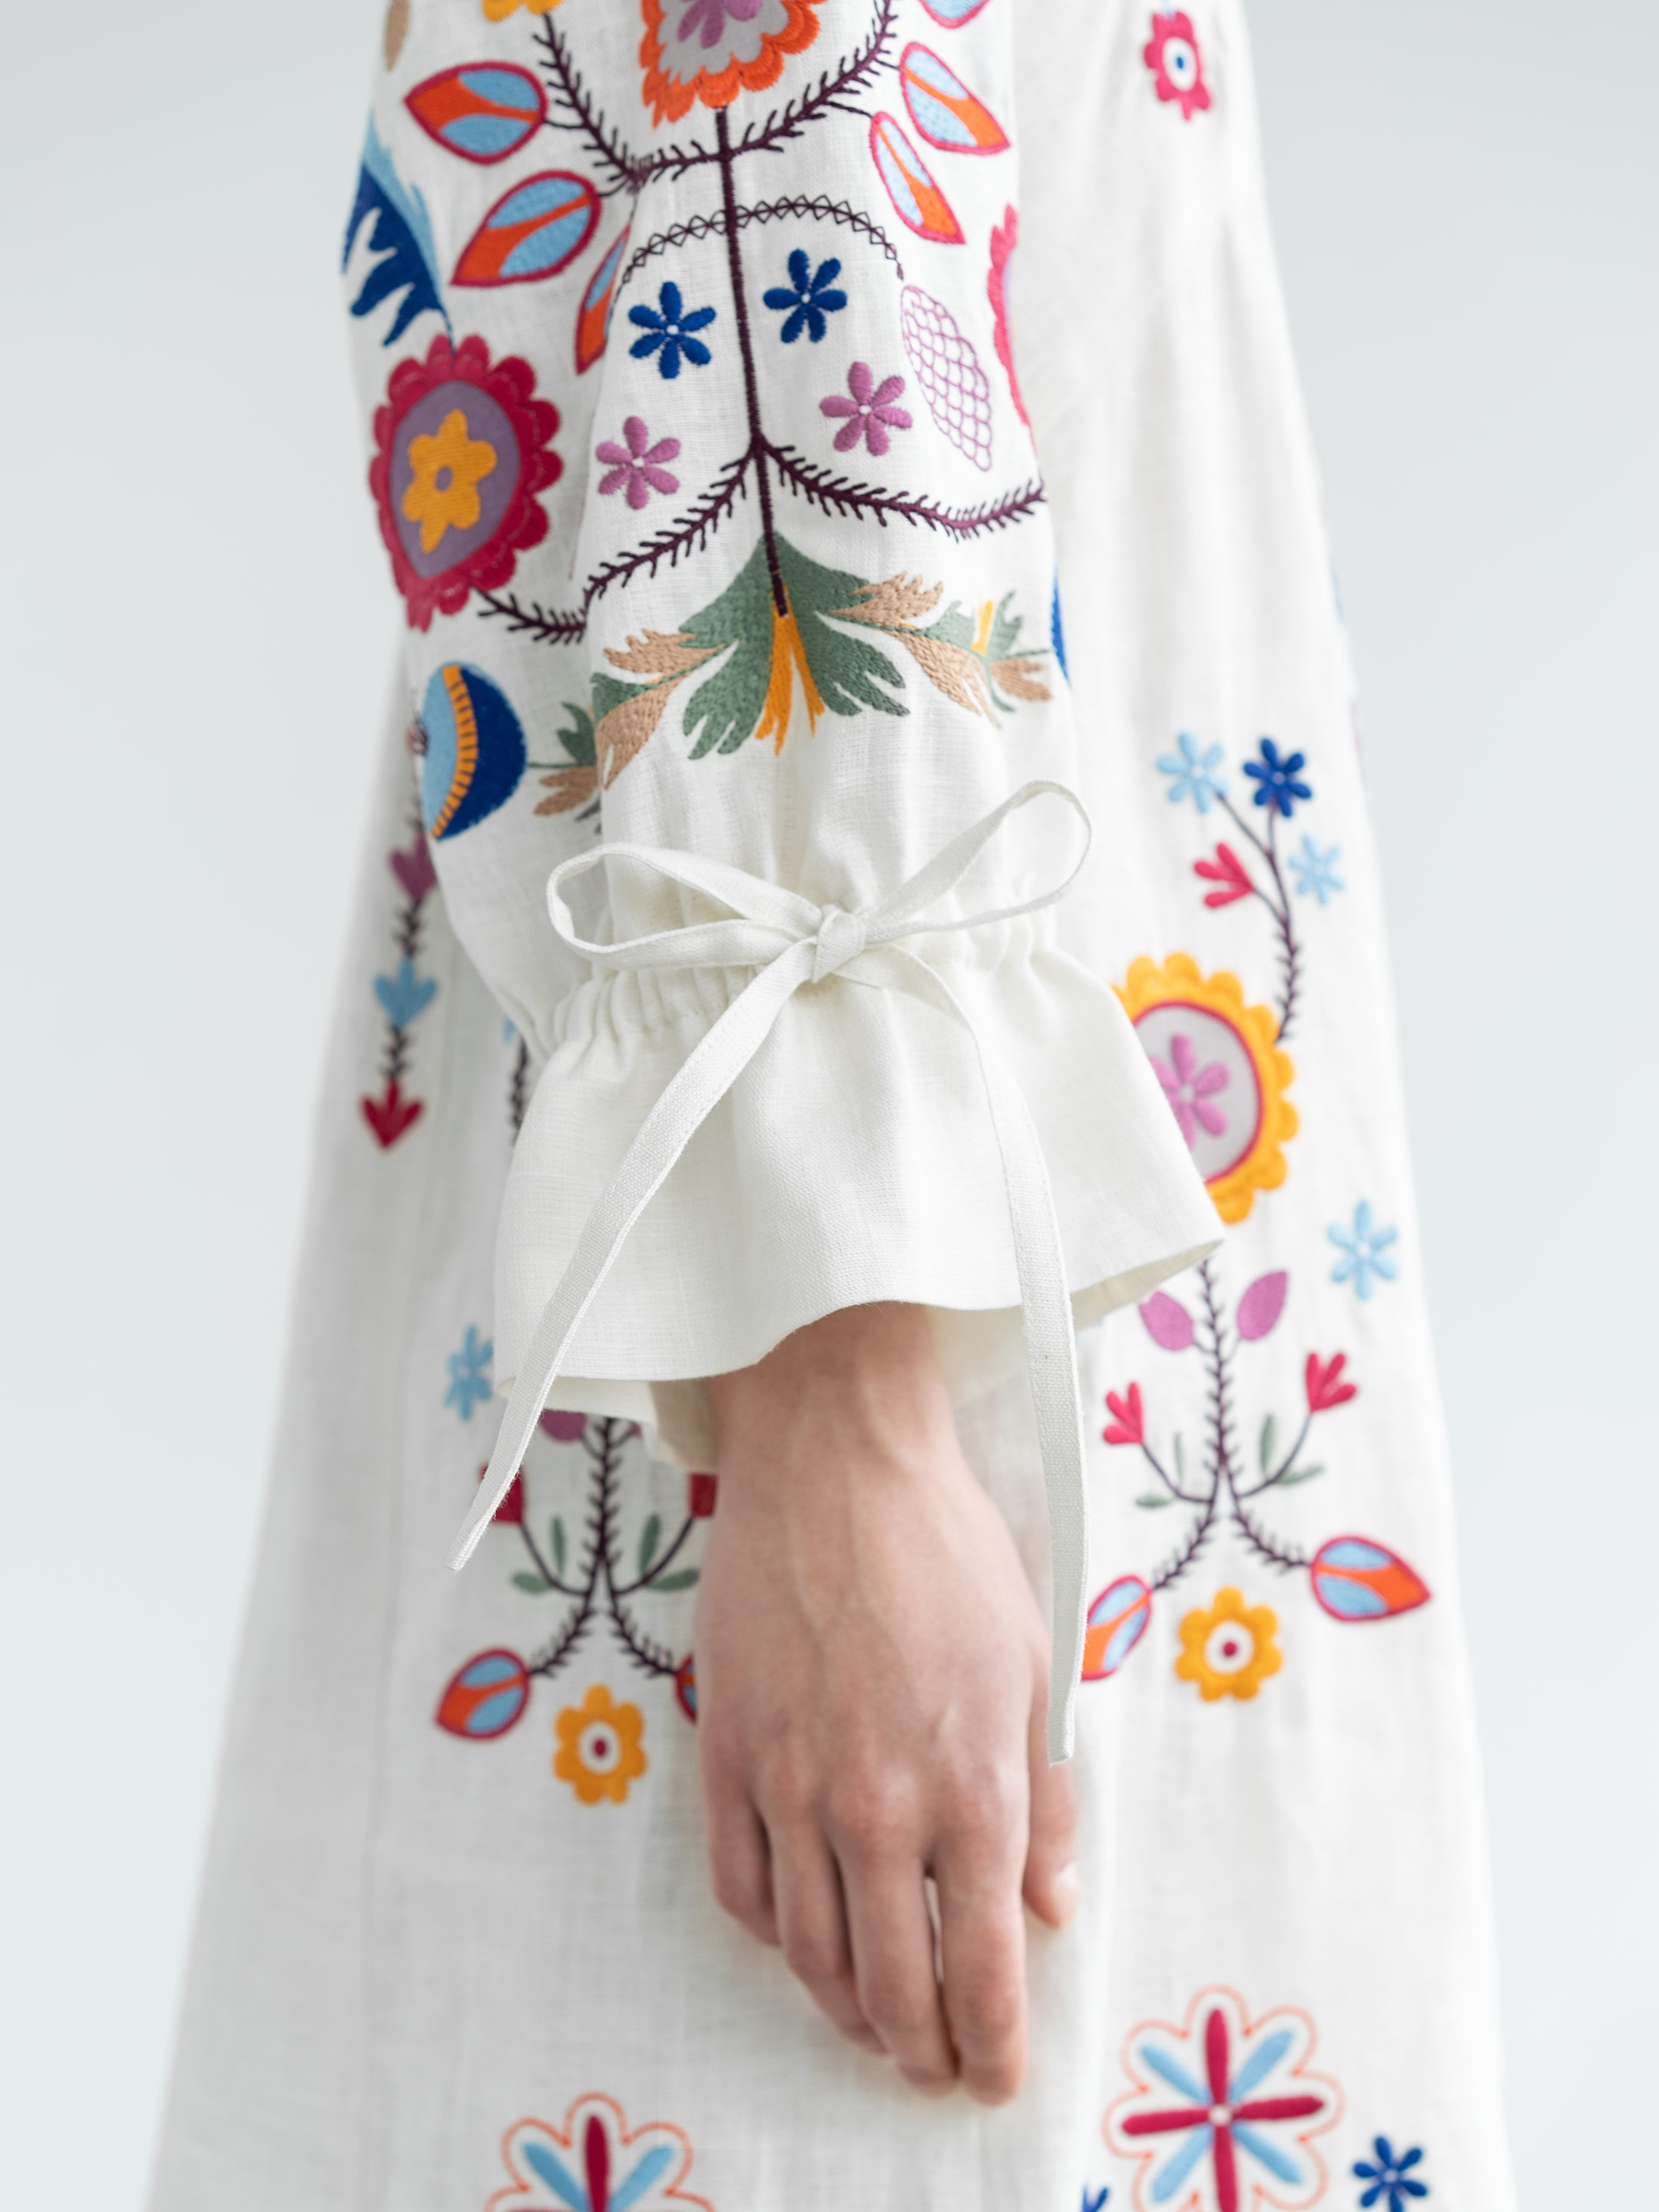 Women's embroidered dresses  Buy Women's embroidered dresses in Kyiv —  Etnodim